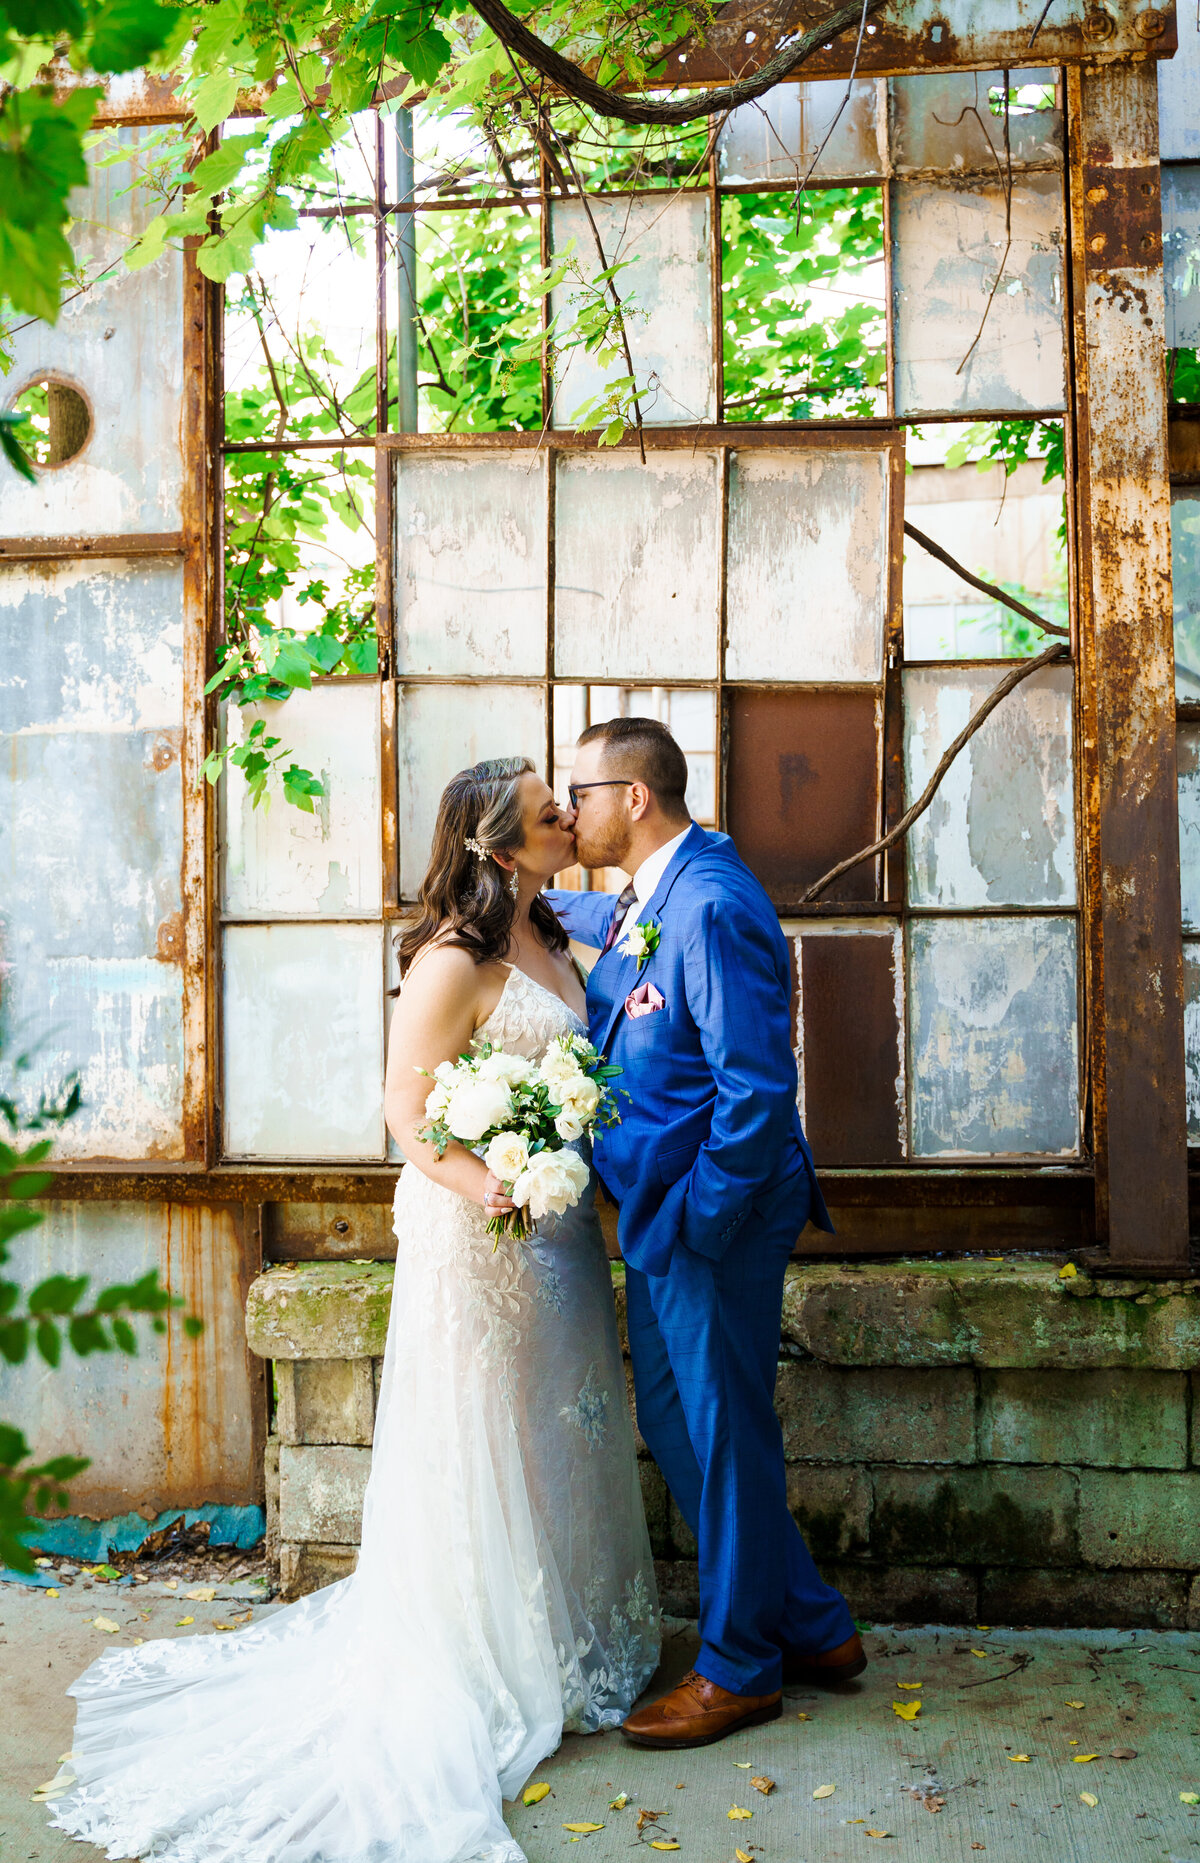 Bride and groom sharing a kiss in front of some old industrial windows at Strongwater Events in Columbus, Ohio.